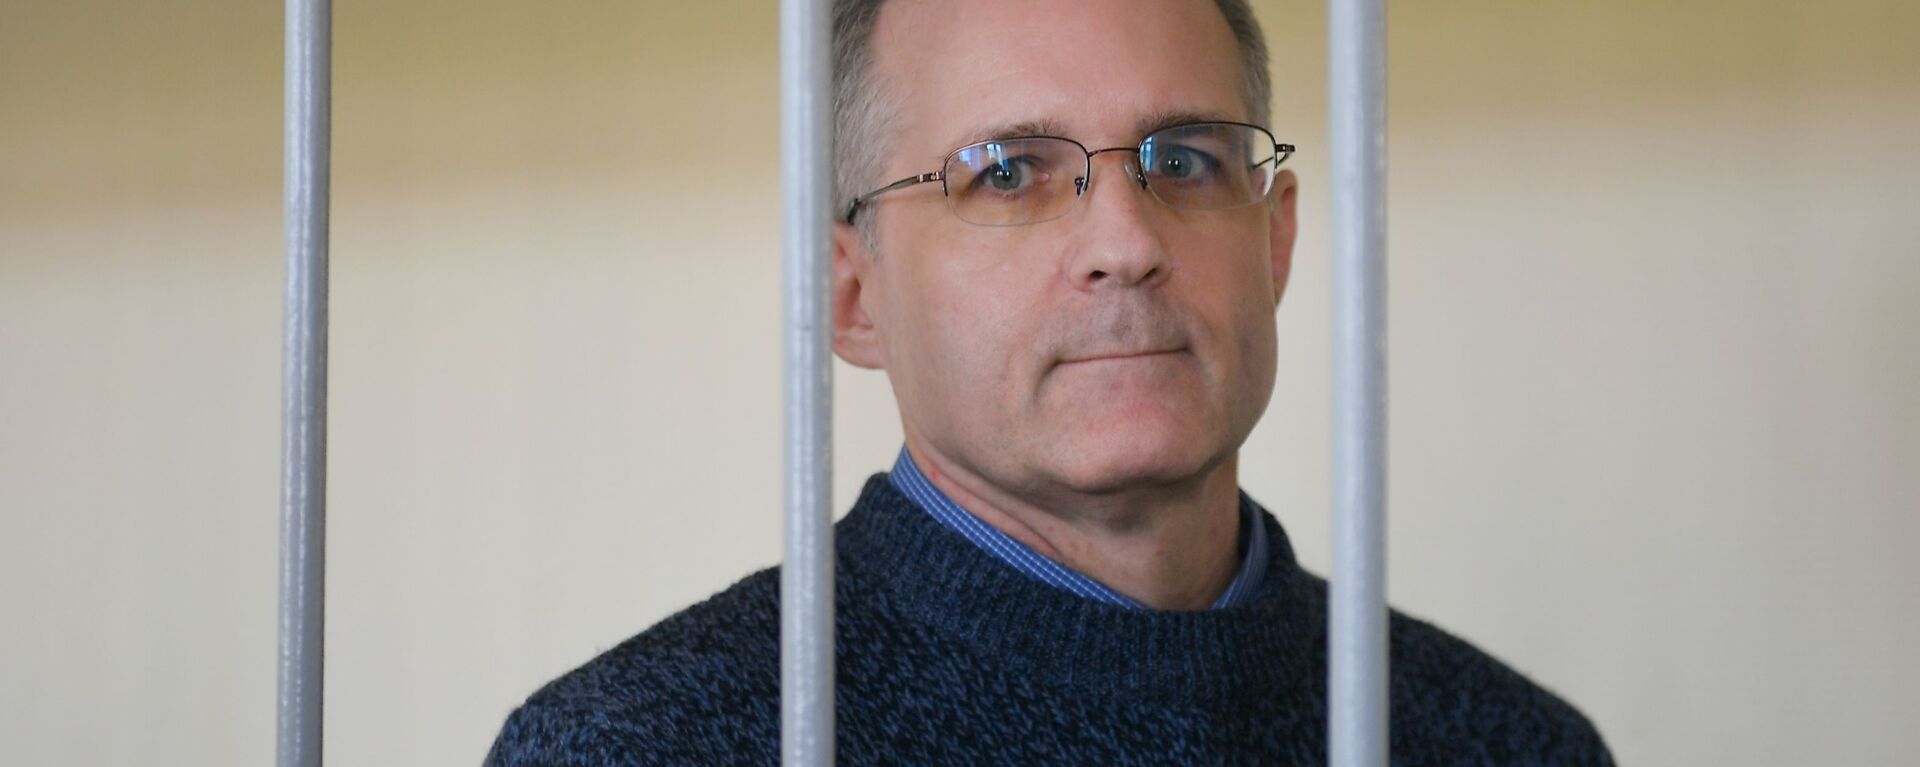 U.S. Paul Whelan waits in a courtroom as the court considers requests to extending his arrest until October 28, at the Lefortovsky Court, in Moscow, Russia. Whelan was accused of espionage and detained by the Russian Federal Security Service on December 28, 2018 - Sputnik International, 1920, 23.03.2022